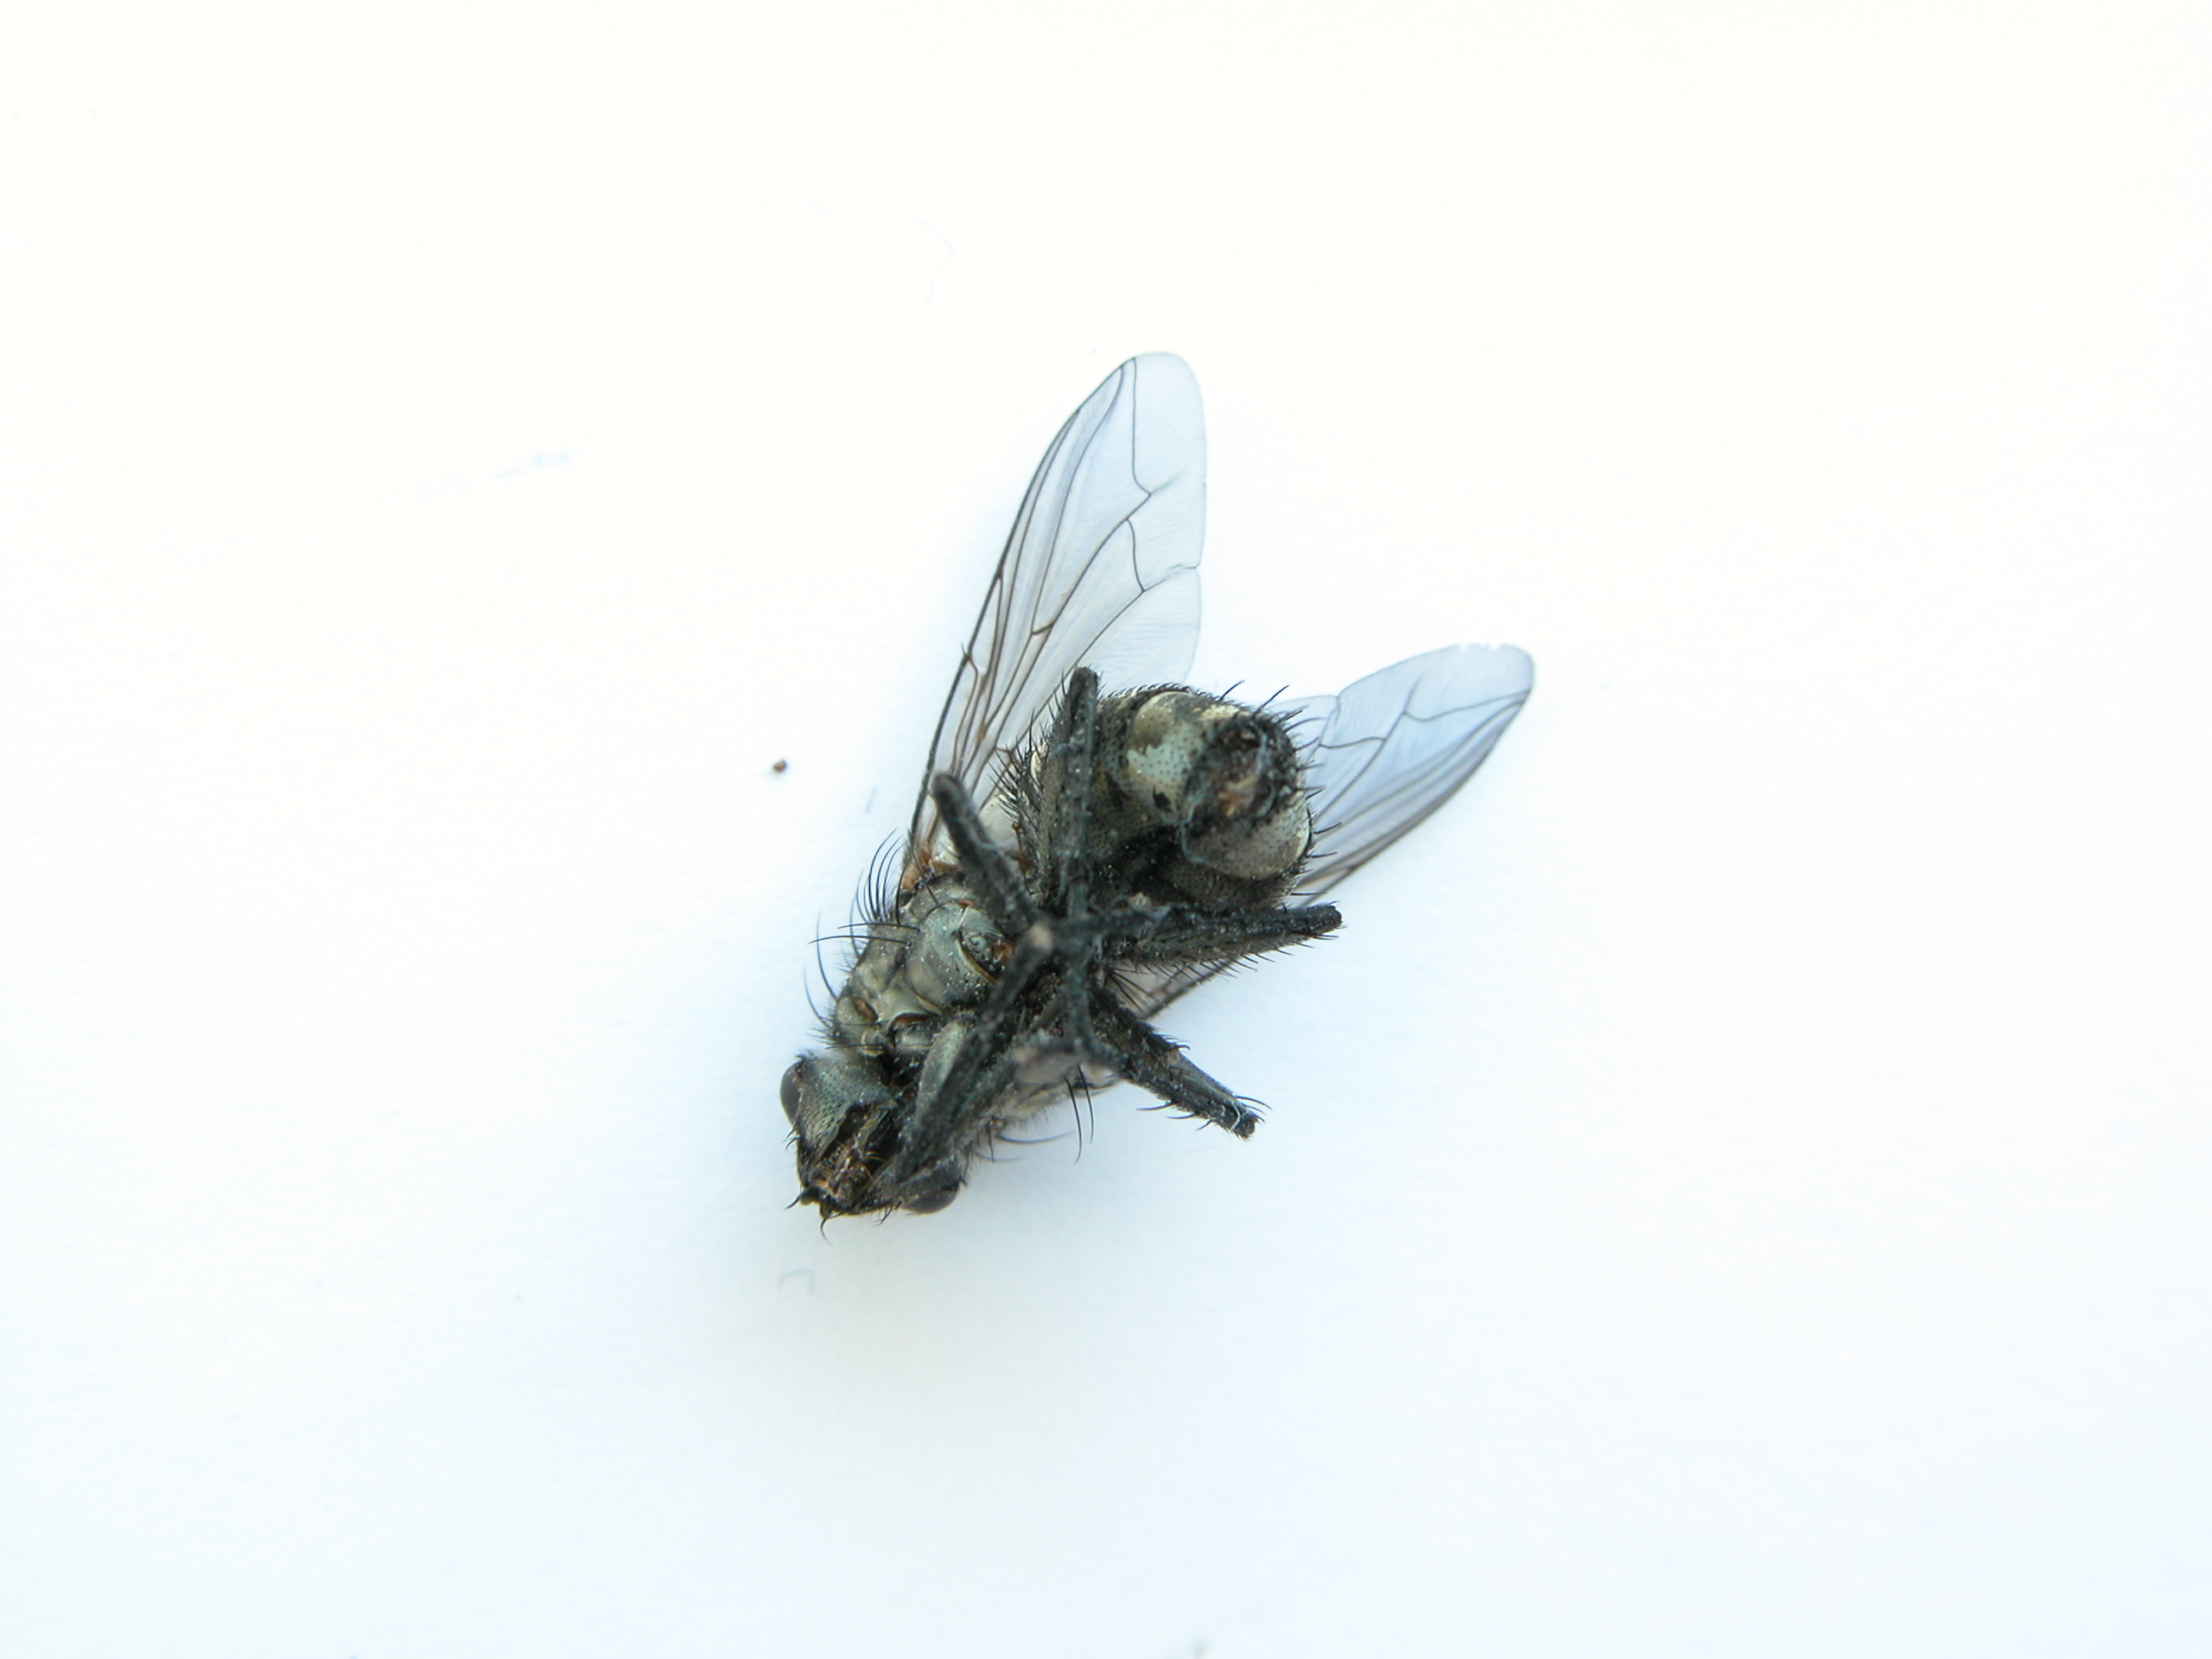 nature animals insects flykit disection fly macro dead bottom leg legs wing wings hairy